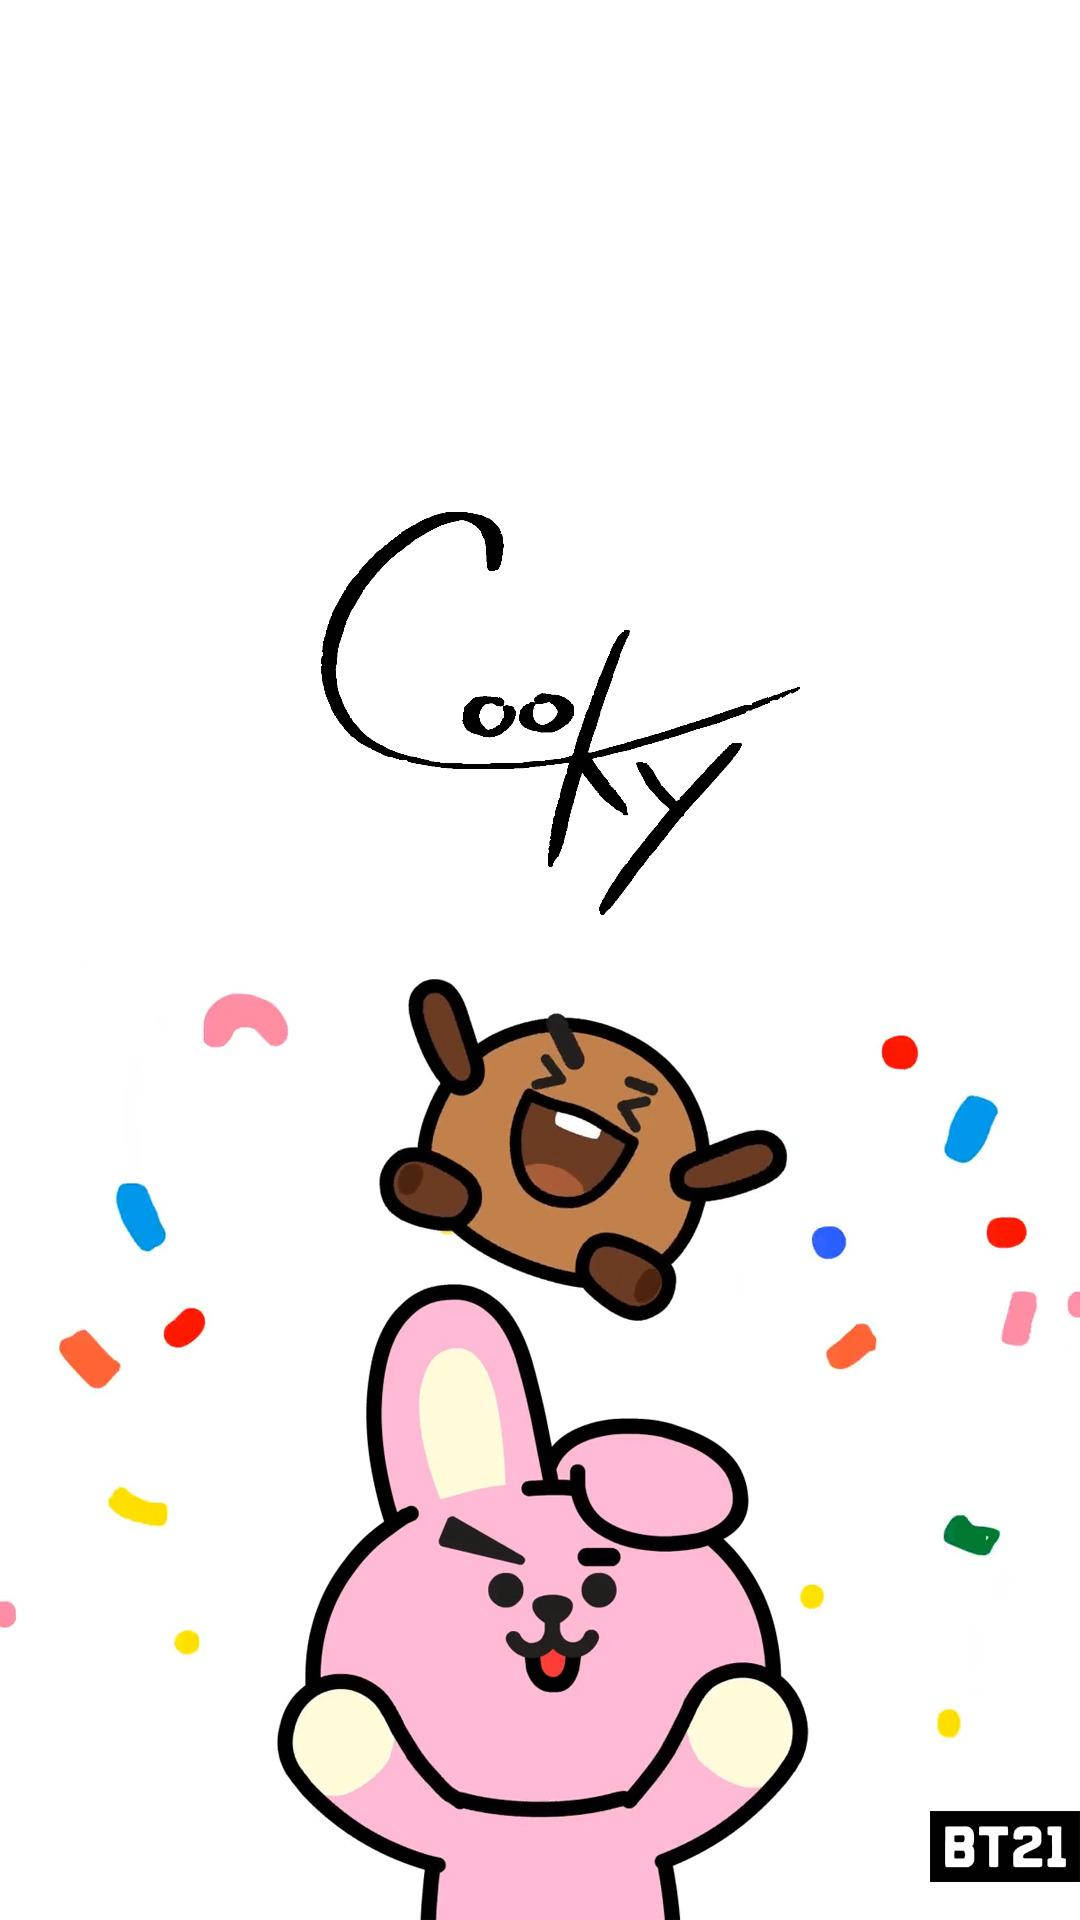 Shooky Bt21 With Cooky